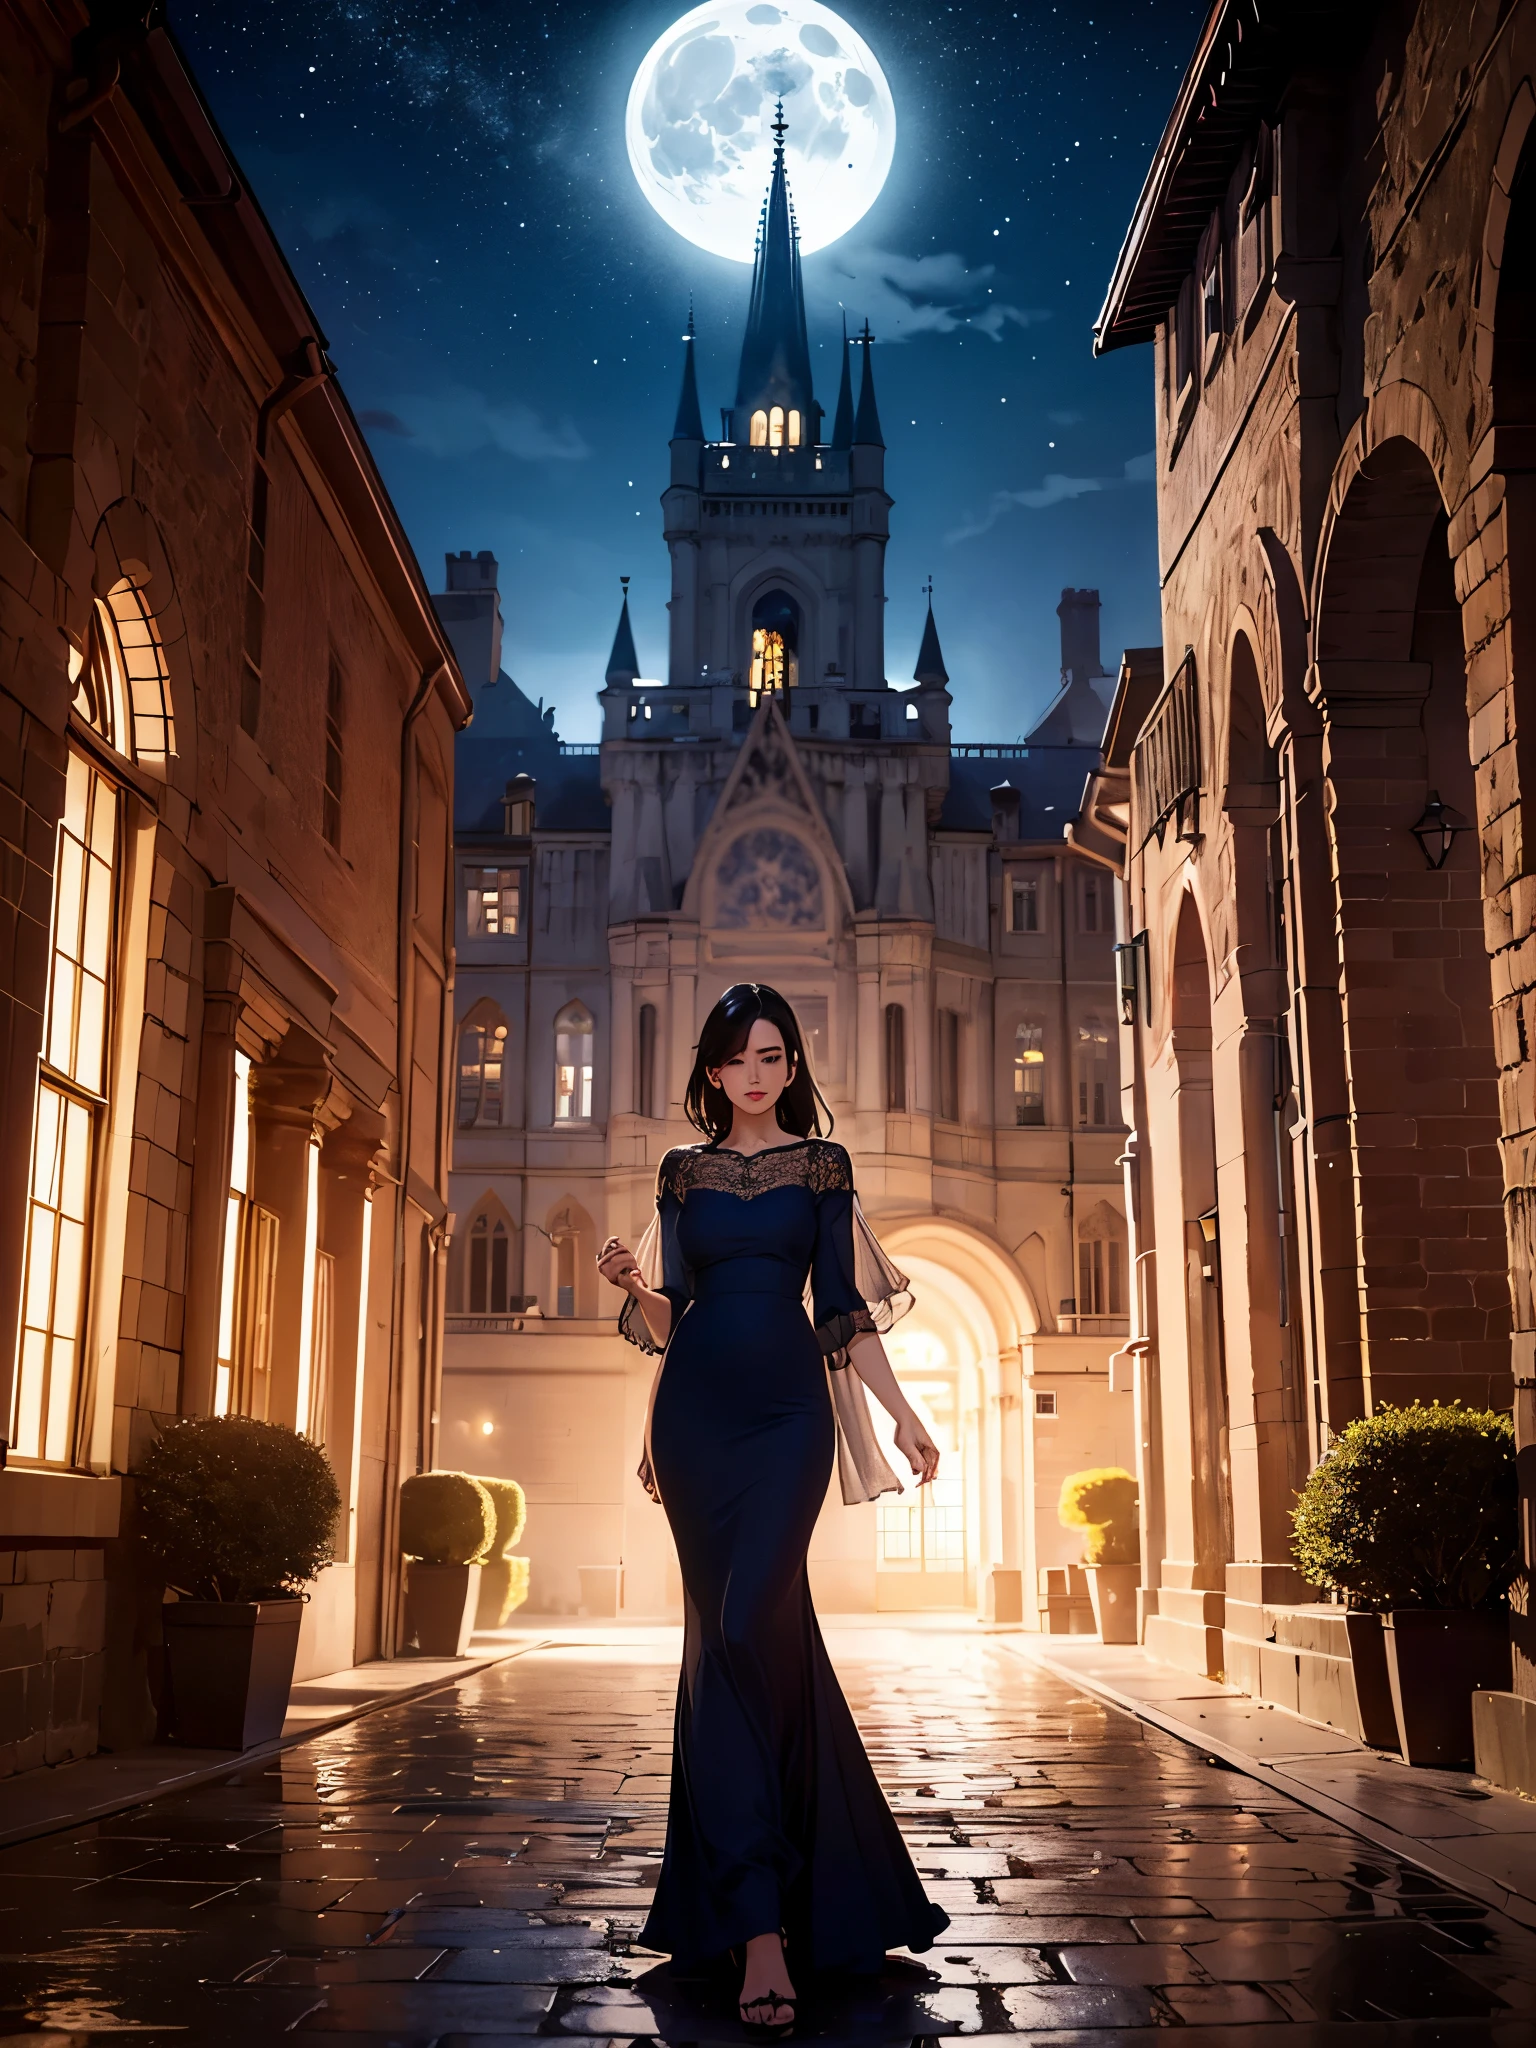 (A girl with black hair walks in the courtyard of a castle on a full moon night), (best quality, 4k, highres, masterpiece:1.2), ultra-detailed, (realistic, photorealistic:1.37), HDR, (crimson, deep blue) color palette, (soft, gentle) lighting, (oil painting, dreamlike) medium, detailed moonlight reflections on the cobblestone ground, intricate architectural details of the castle walls, (flowing, ethereal) gown swaying in the breeze, (mysterious, enchanting) atmosphere, (subtle, delicate) shadows cast by the moon, (whispering, rustling) leaves of ancient trees, (silhouetted, towering) spires reaching towards the night sky, sparkling stars illuminating the scene, muted sounds of the night punctuated by occasional hoots of an owl.